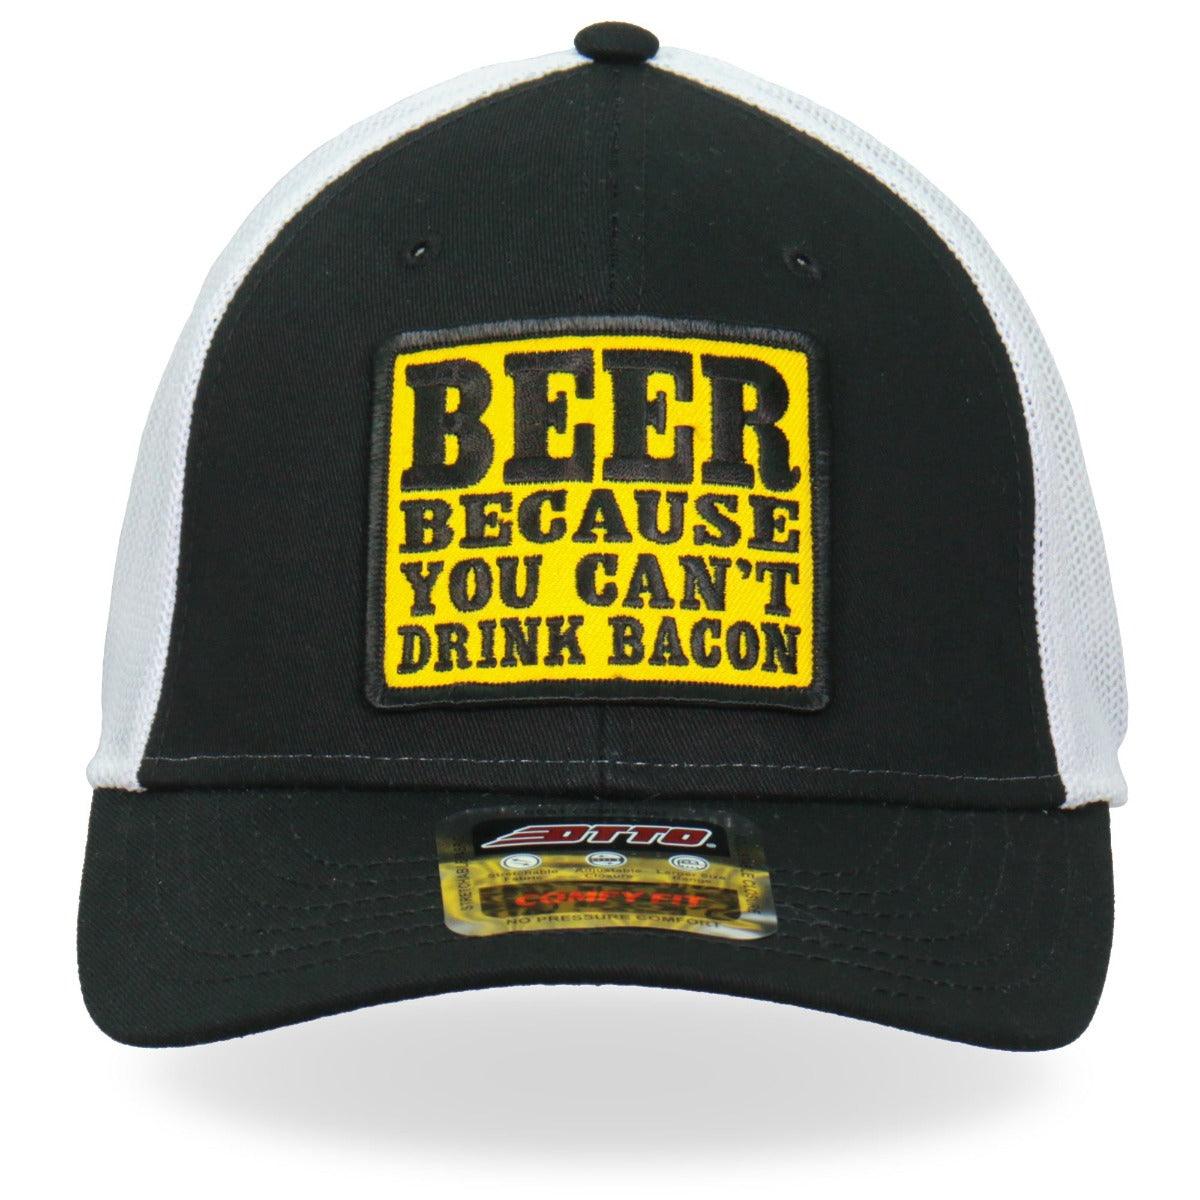 Hot Leathers Trucker Hat Can'T Drink Bacon - American Legend Rider